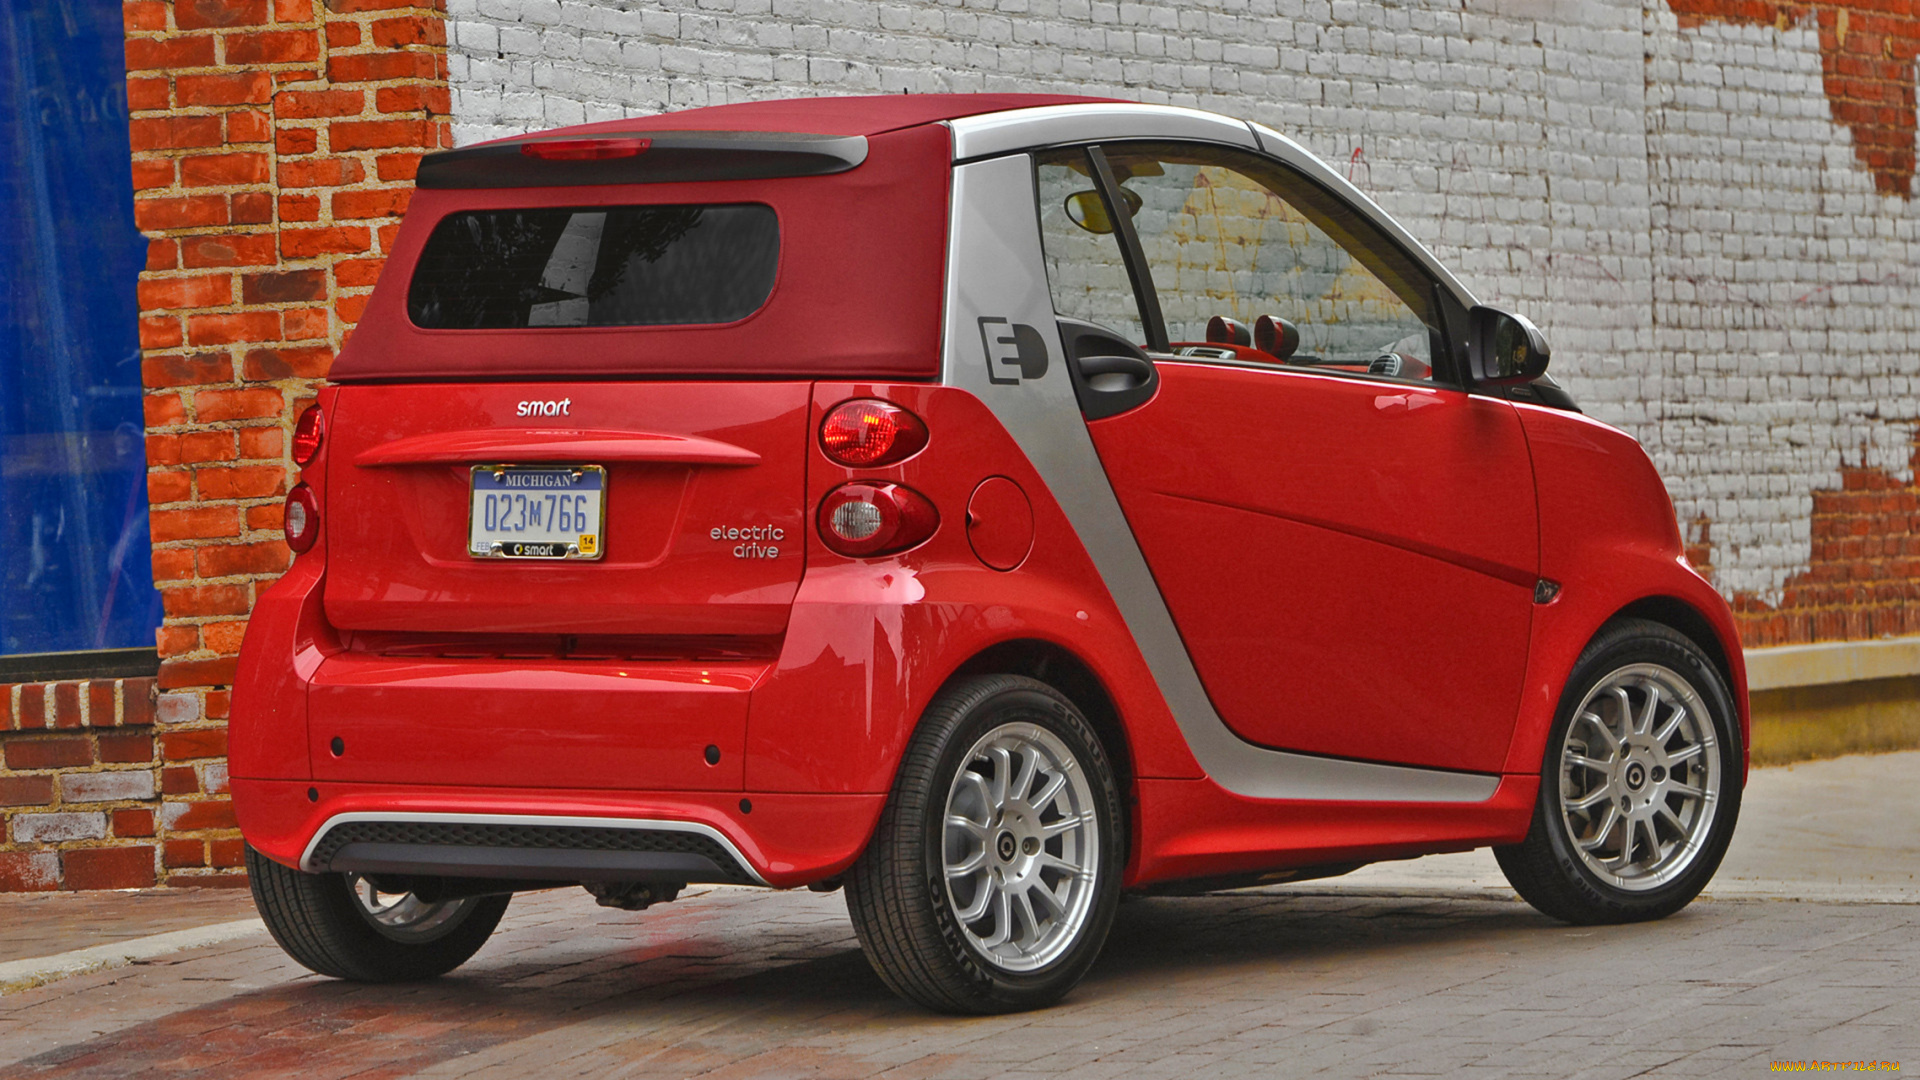 smart, fortwo, electric, drive, 2013, автомобили, smart, drive, fortwo, electric, 2013